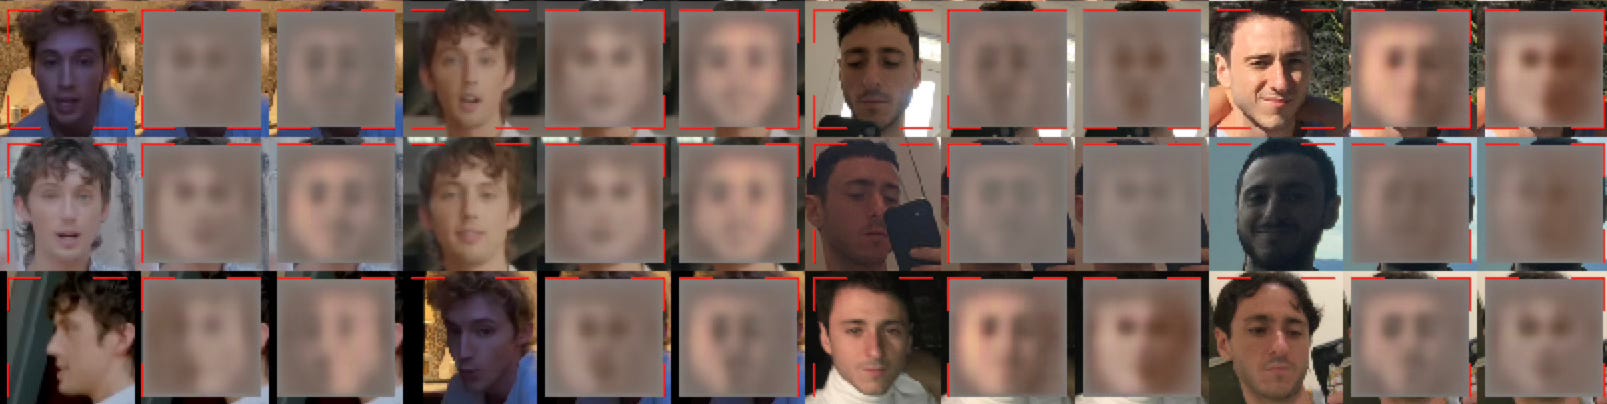 The image shows a blurred and pixelated collage of faces, with pictures outlined in red. The images appear to be screenshots from videos or photos of two different individuals, whose faces seem to be in the process of being swapped, using deepfake technology. The blurring effect makes the features indistinct, which could be a part of the face-swapping process. The collage is arranged in a grid pattern.